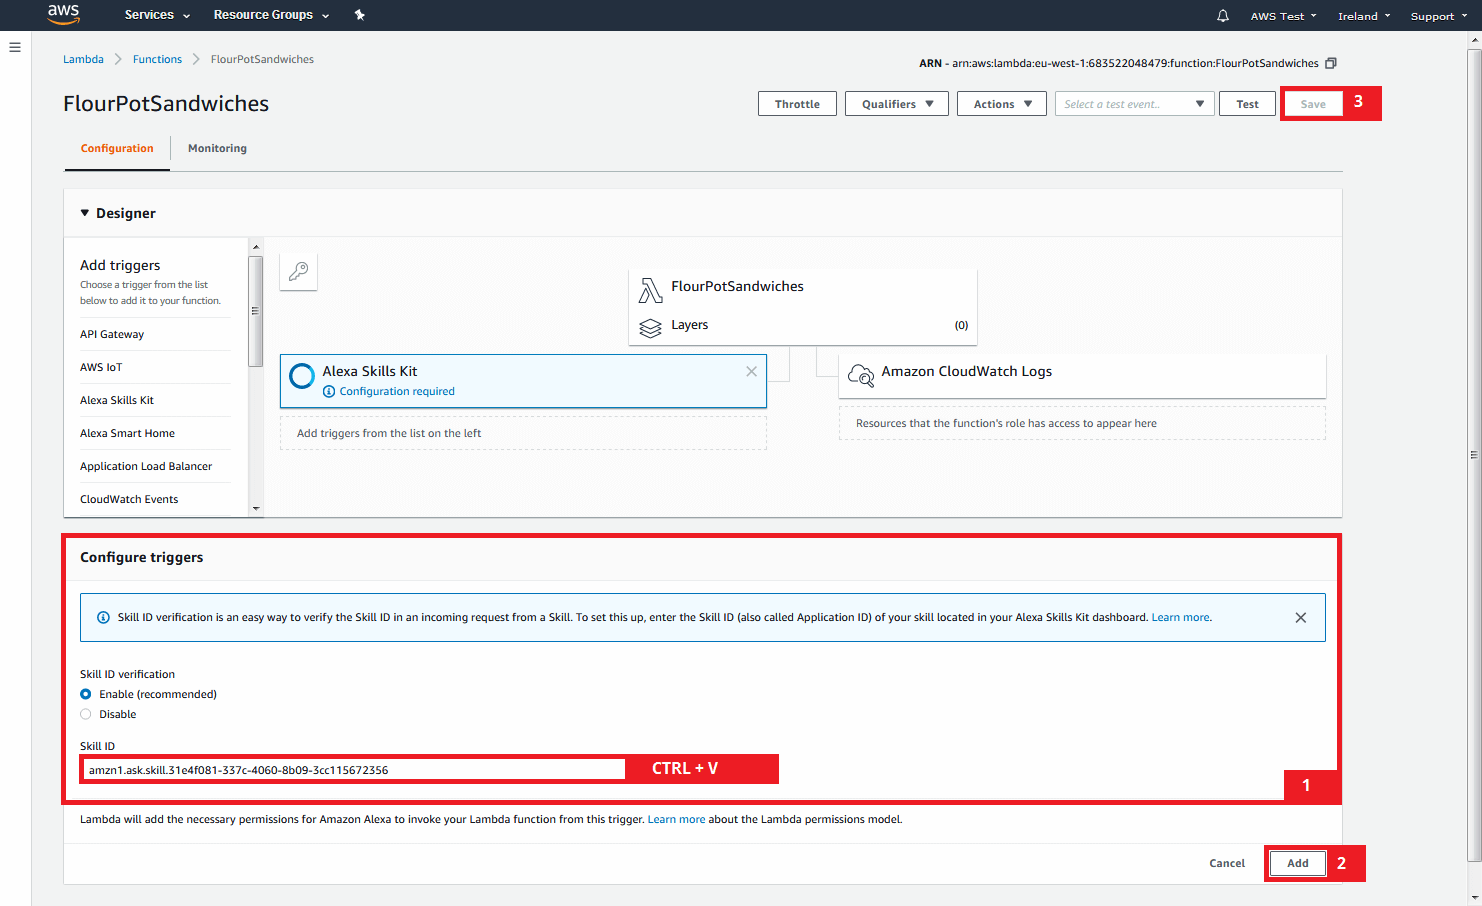 AWS Management Console: linking the trigger through the qualification ID